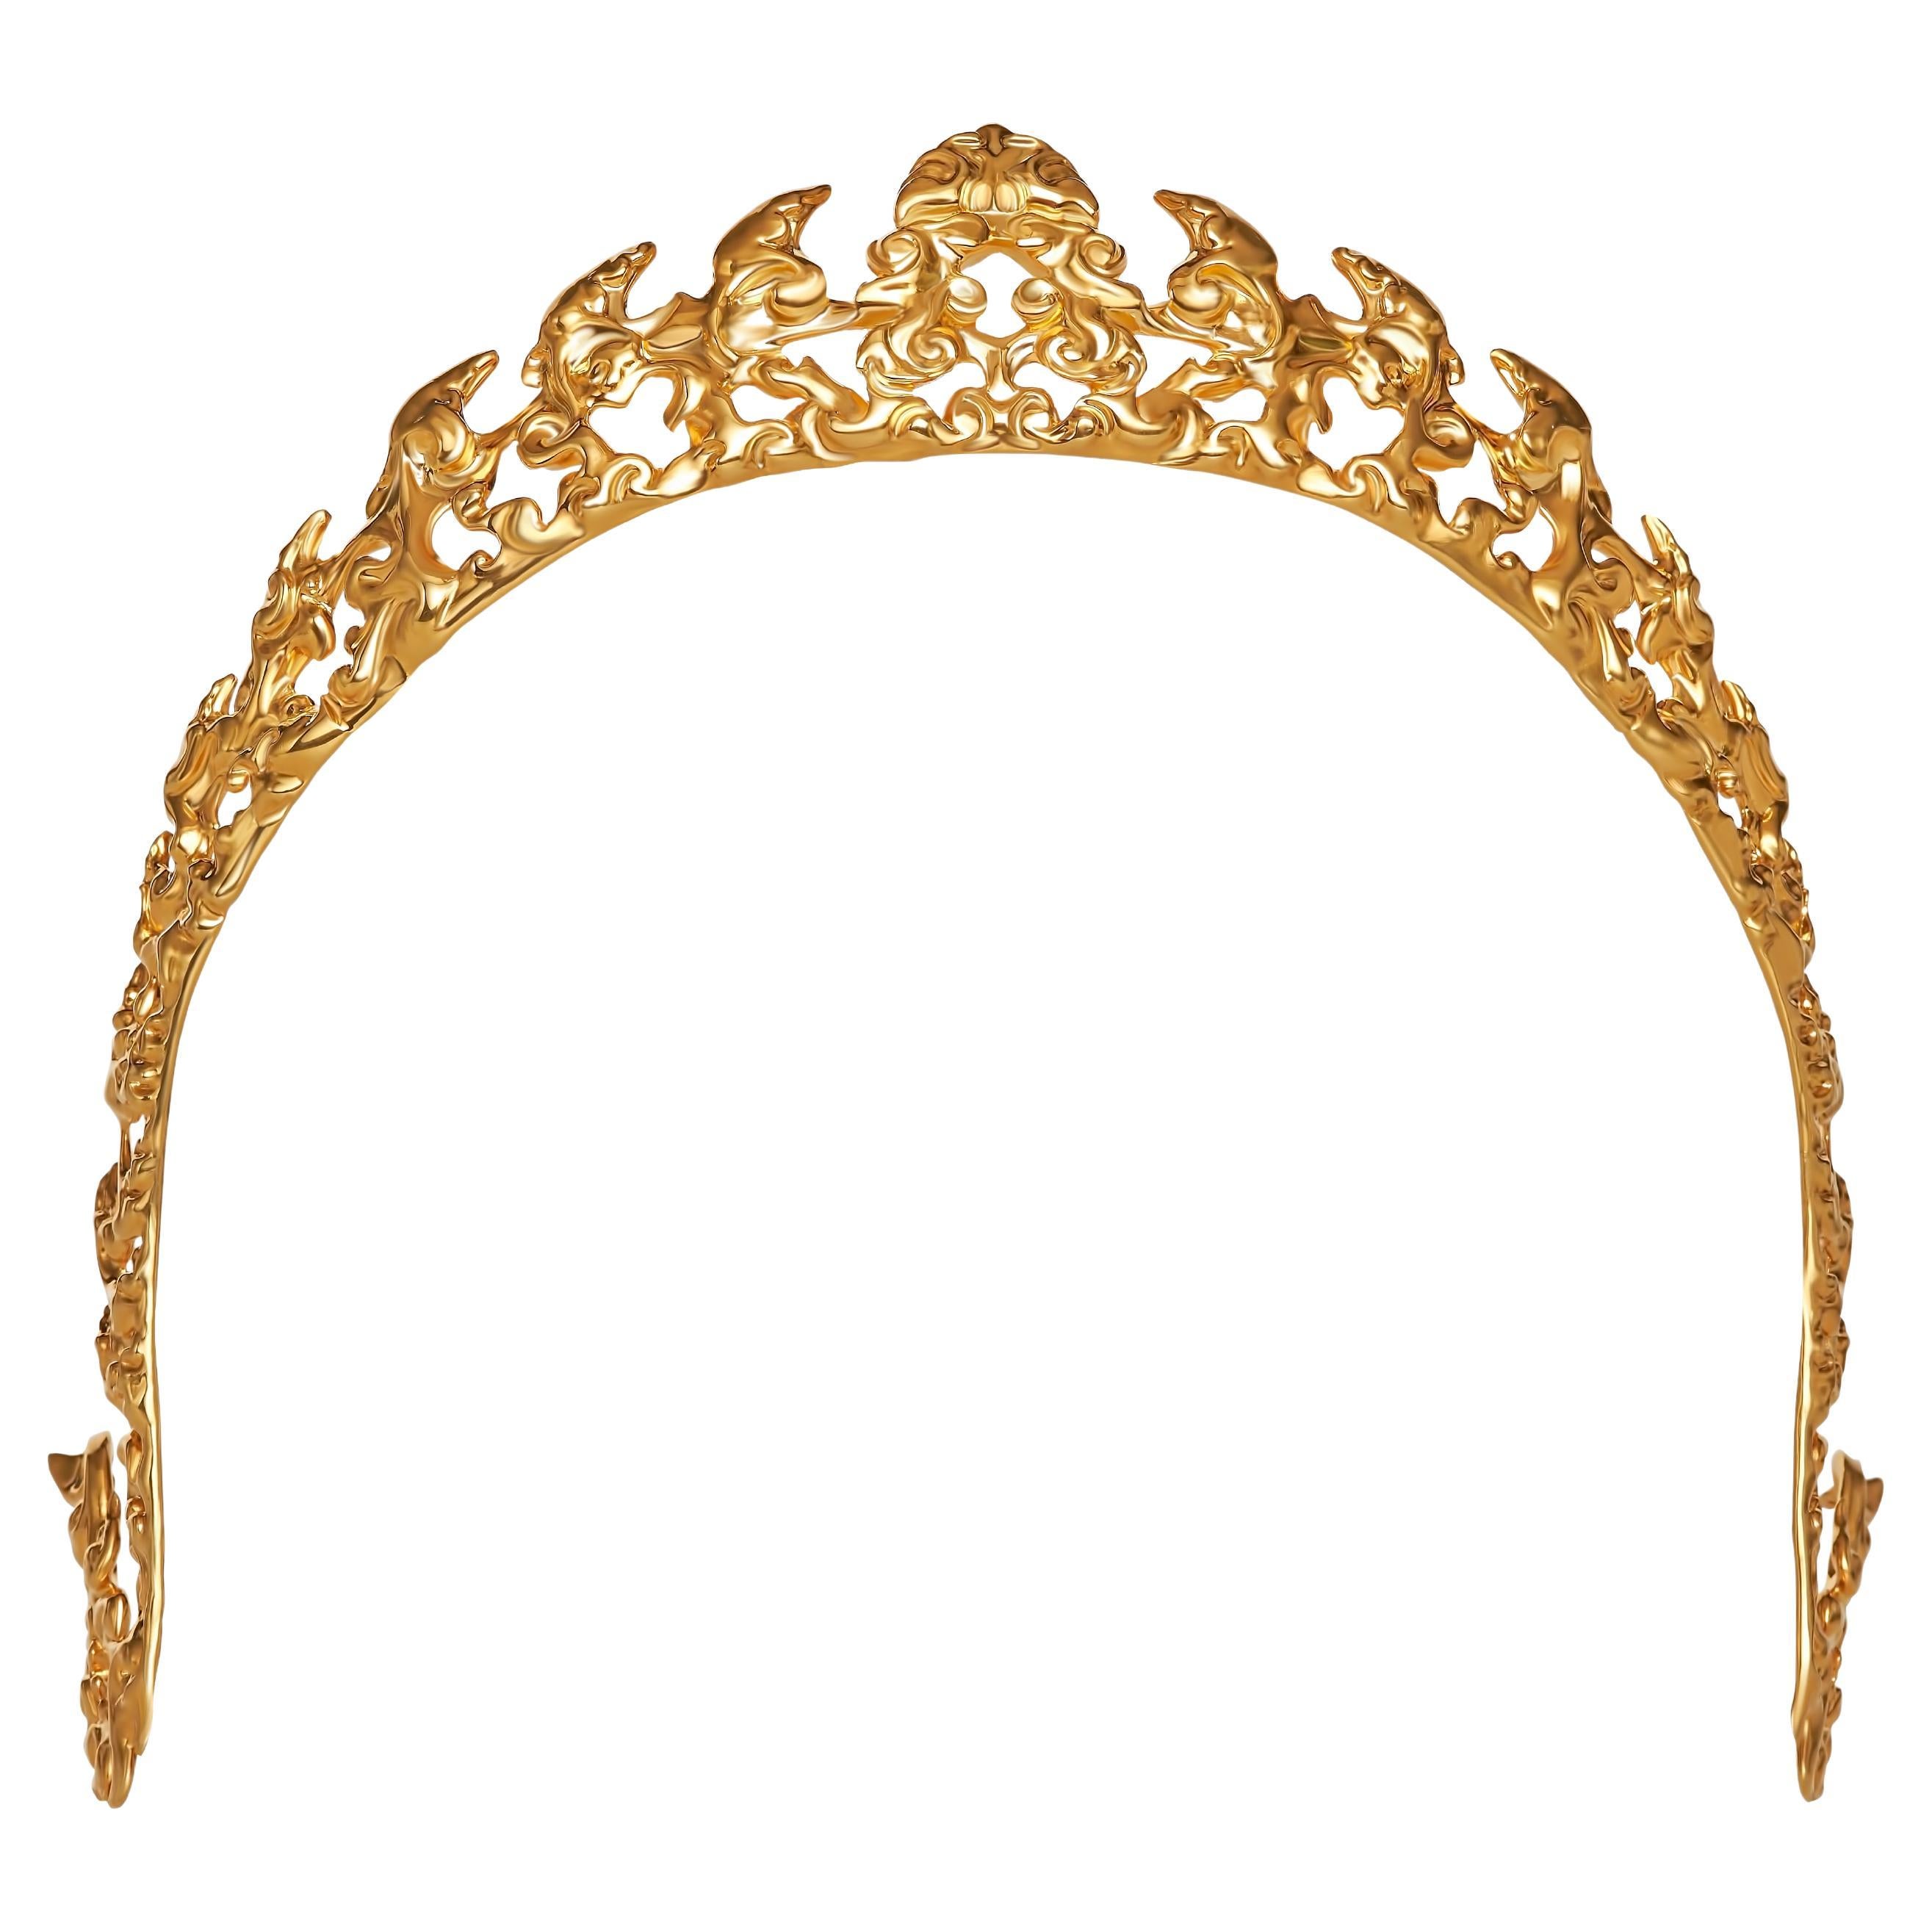 EdoEyen Kbang Angkorian Diadem Style Crown in 18k Gold-Plated Brass For Sale